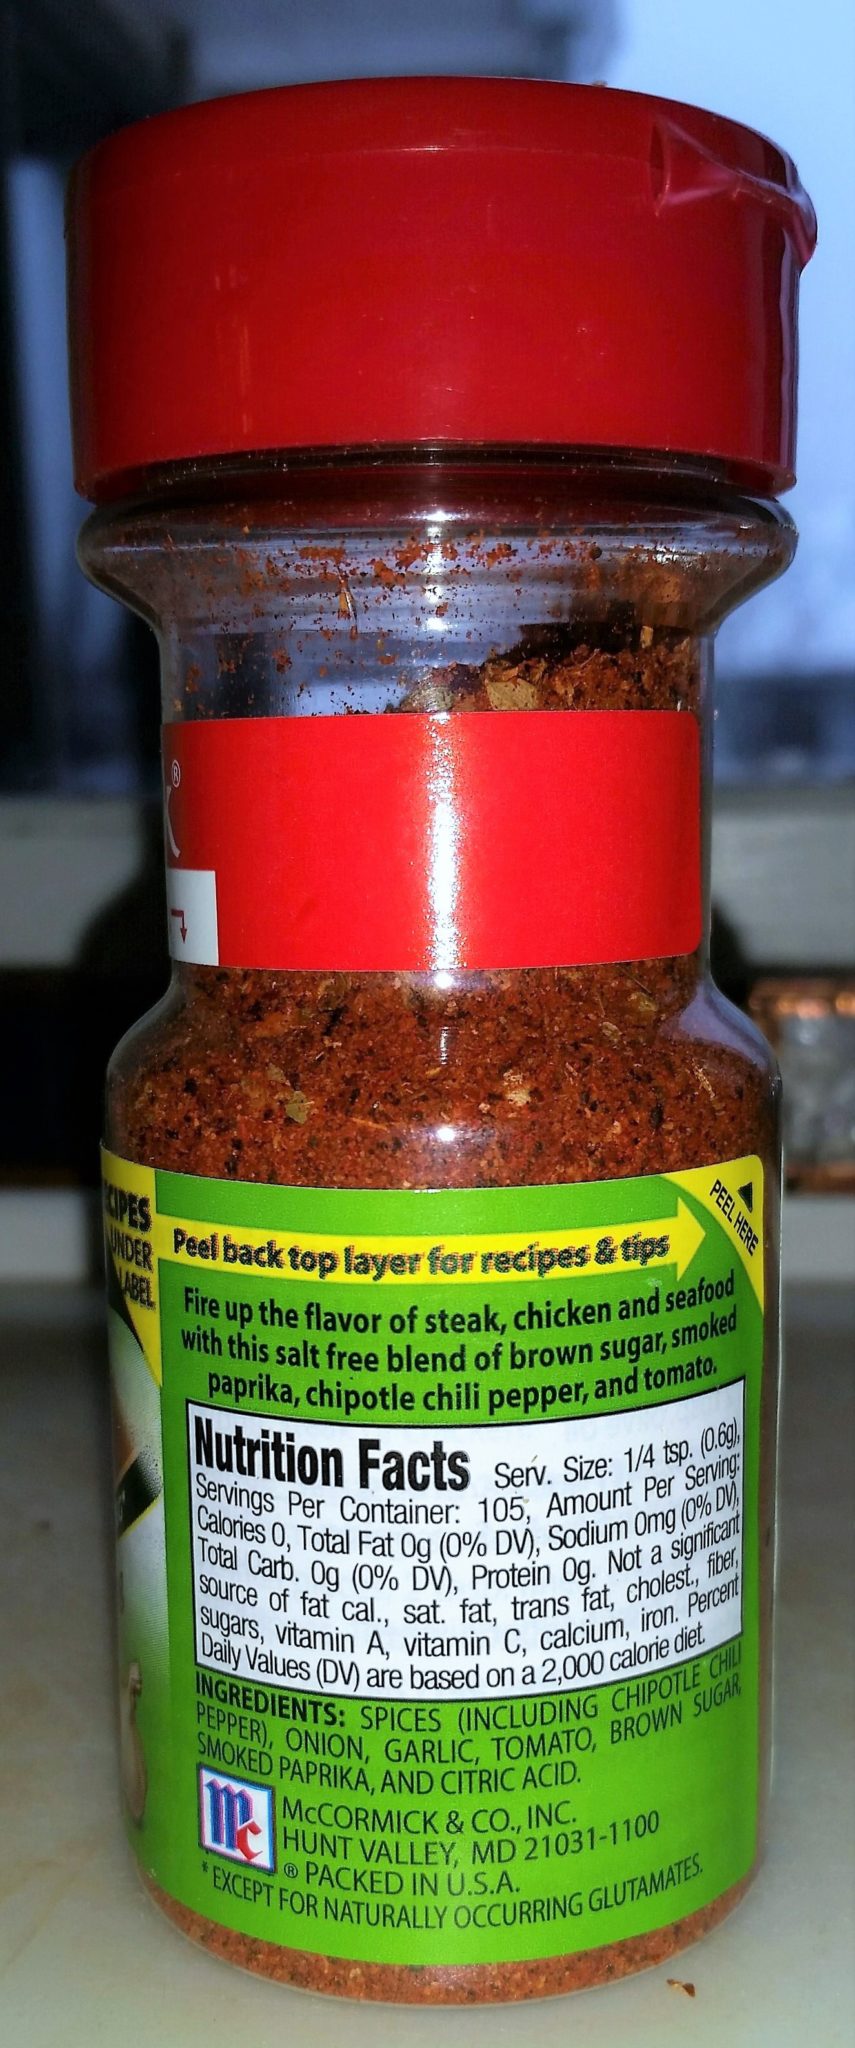 The Benefits of Cooking with Low Sodium Seasonings – Deuce's